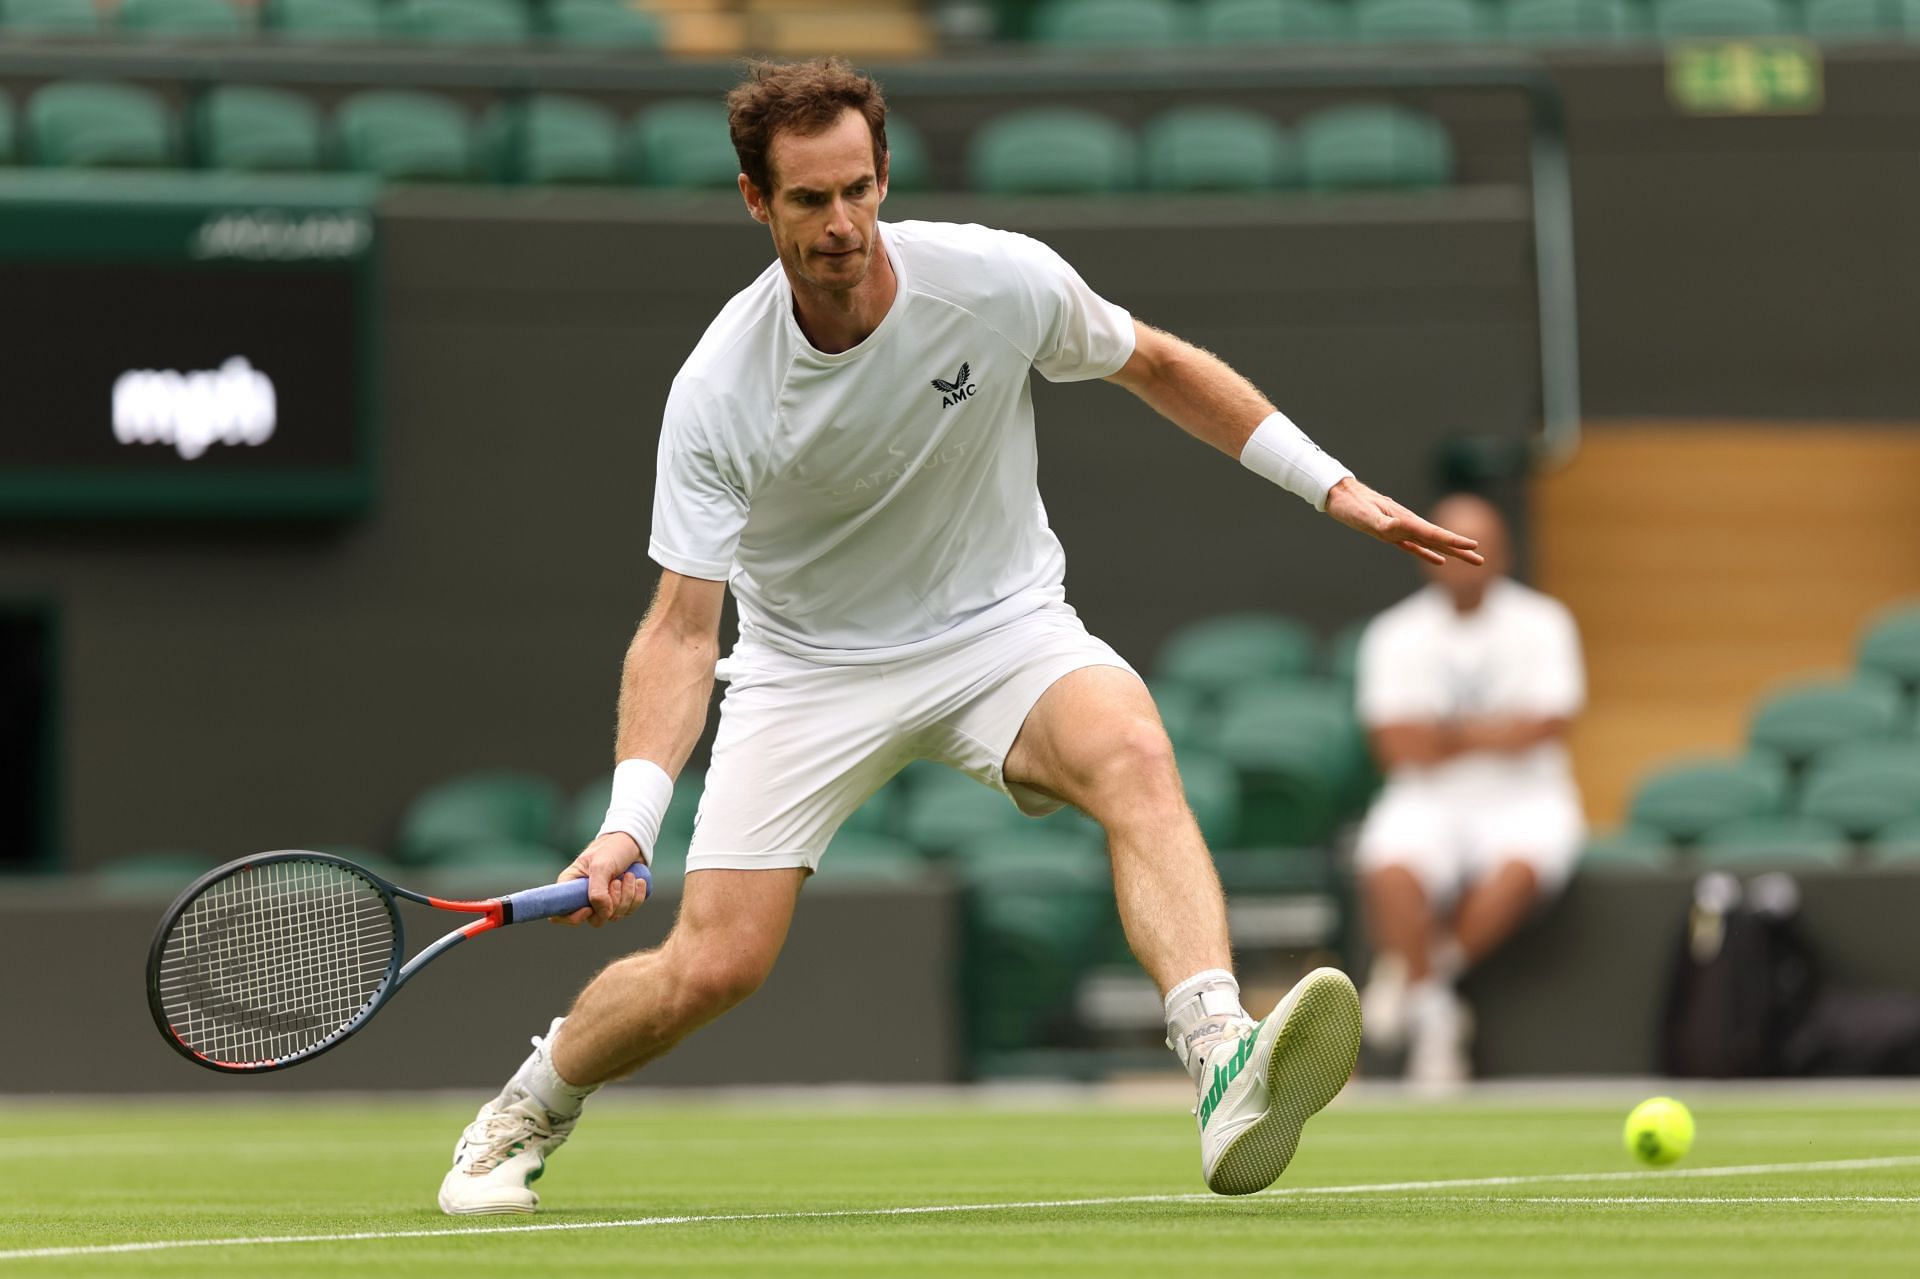 Andy Murray will look to start Wimbledon on a winning note